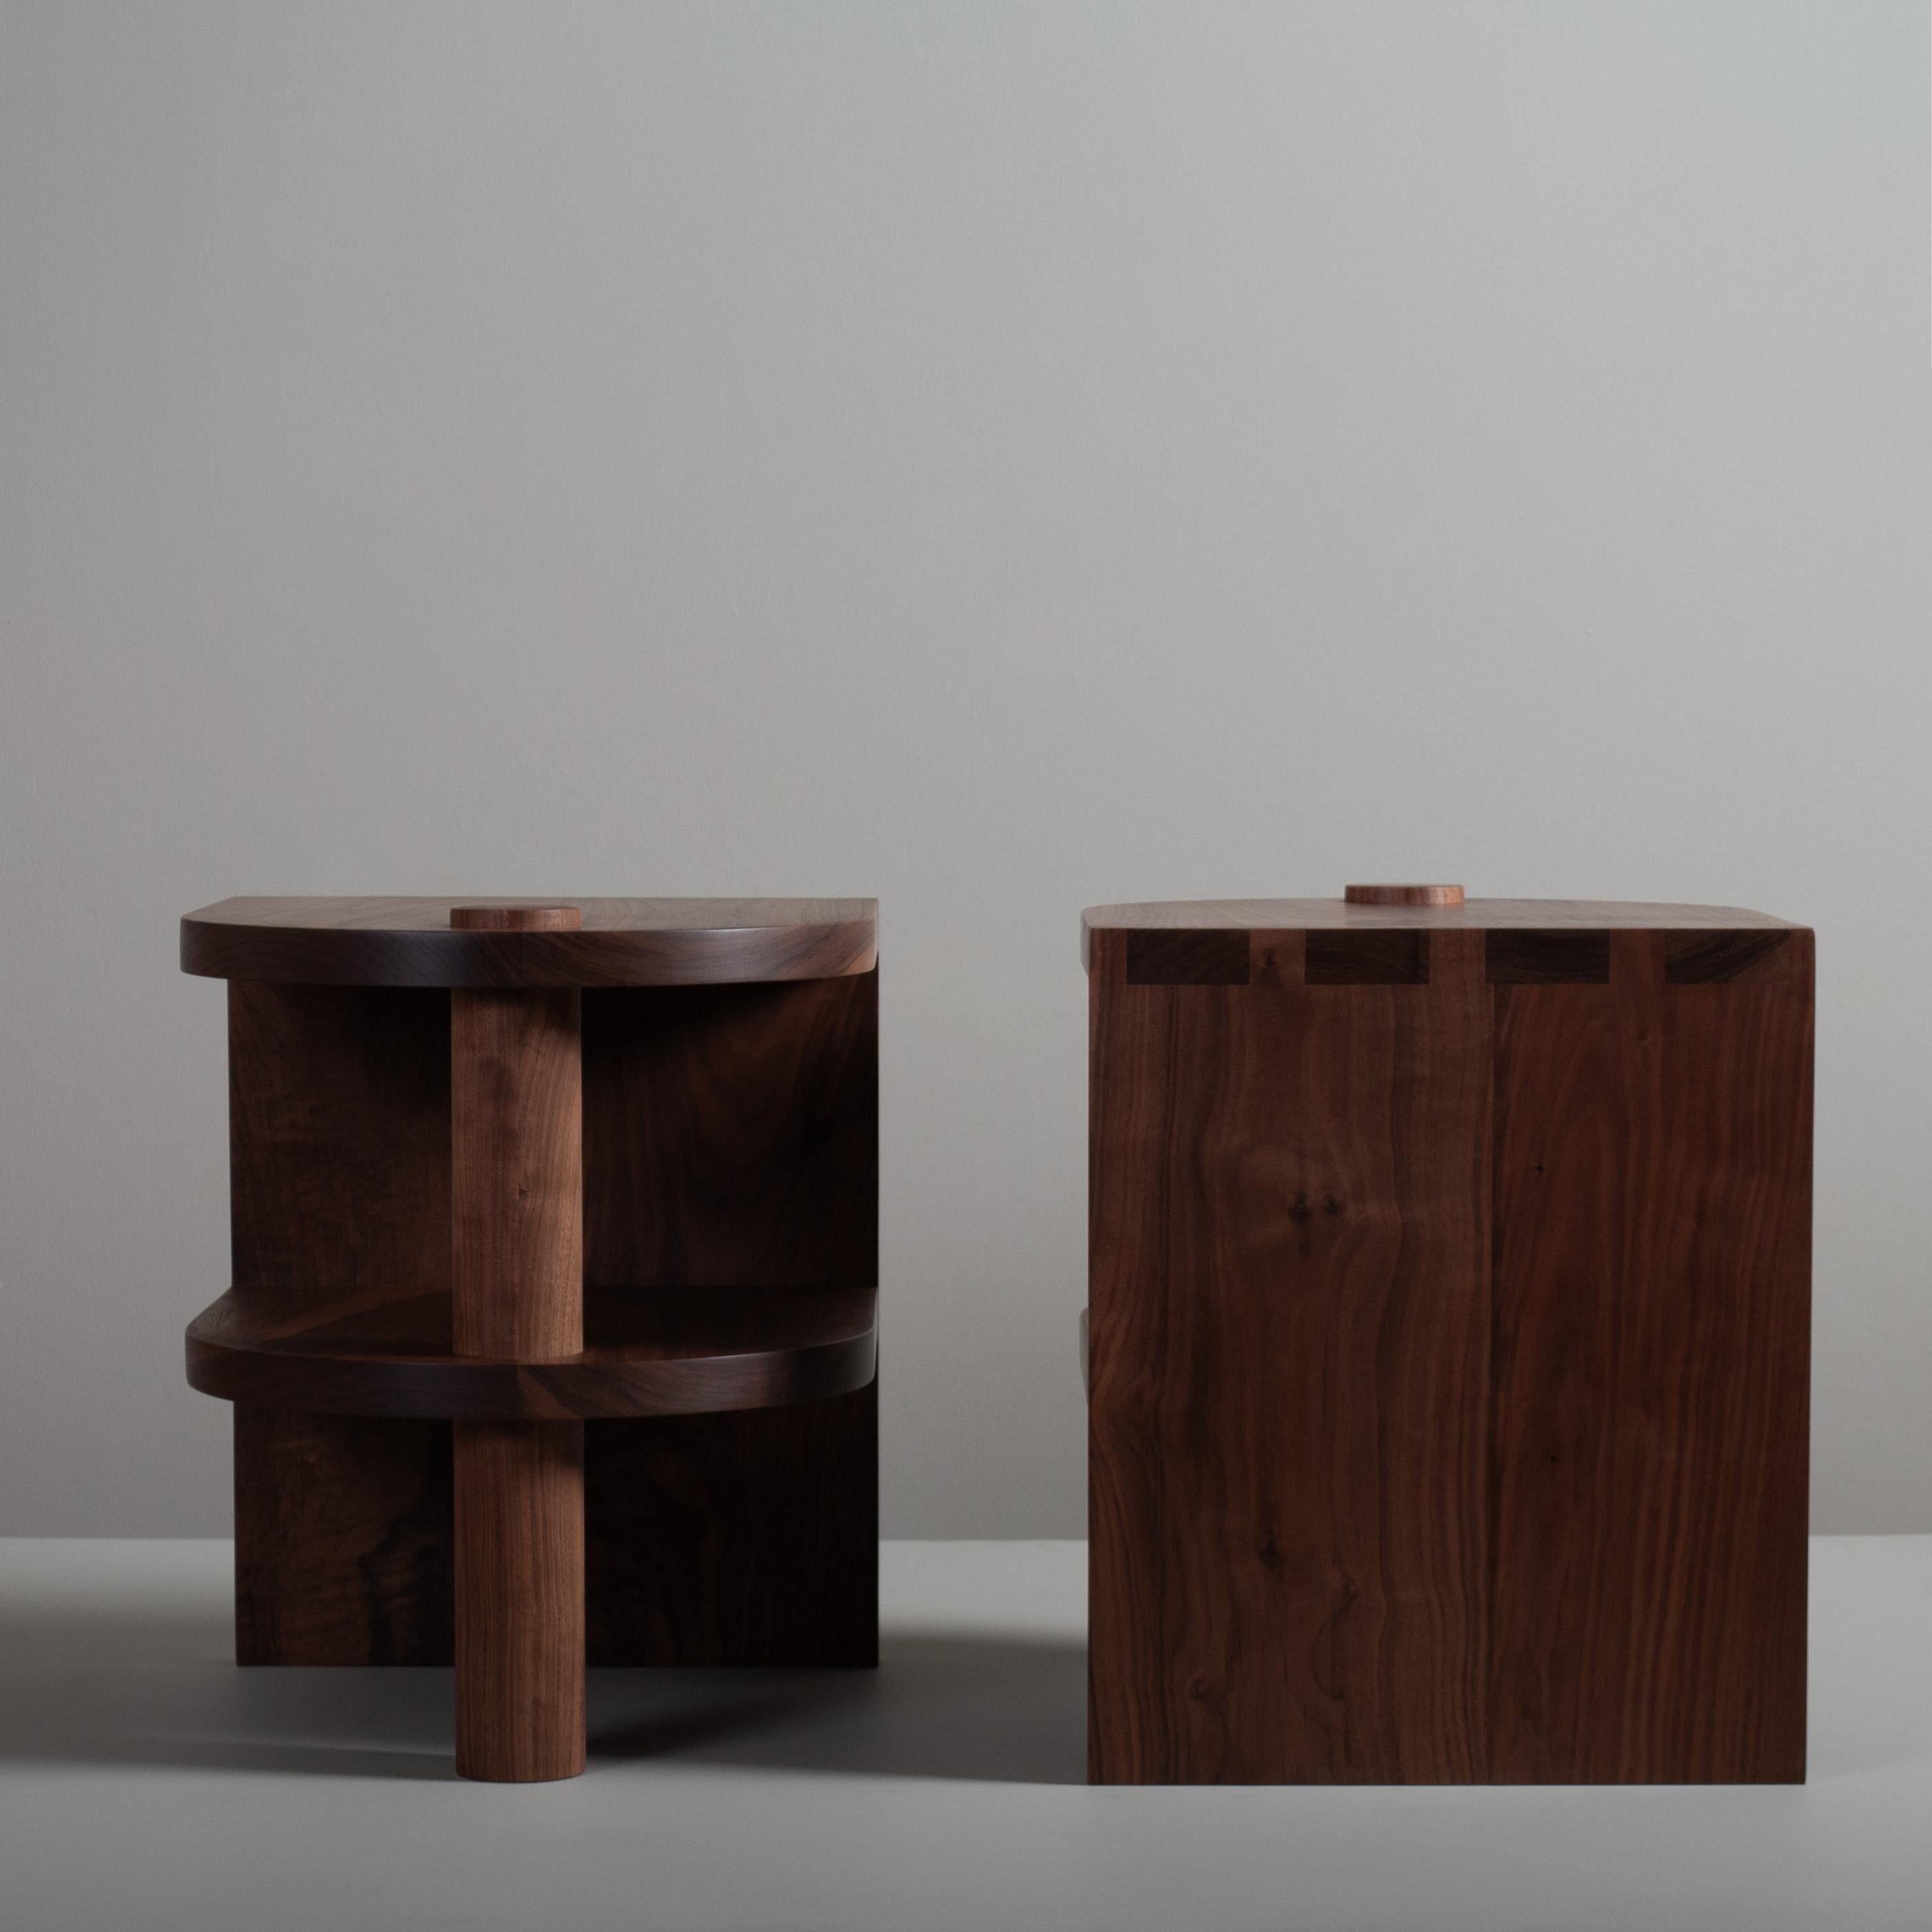 Pair of architectural postmodern/Art Deco American black walnut pillar end or side table. Design by Sum furniture and handcrafted in England using traditional techniques using the finest American black walnut. Hand-cut large dovetail jointing with